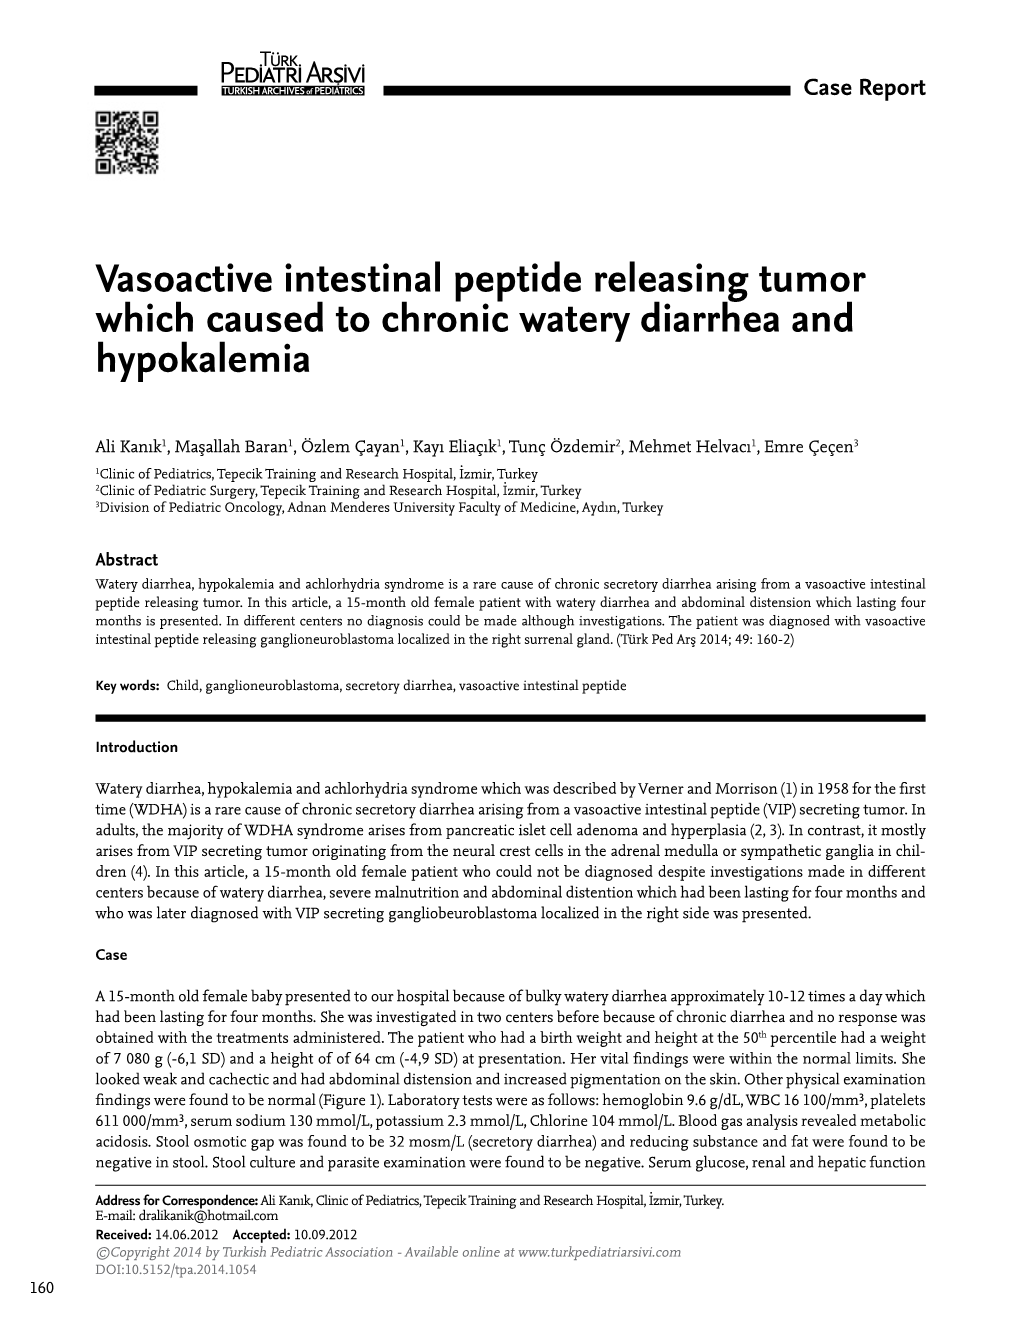 Vasoactive Intestinal Peptide Releasing Tumor Which Caused to Chronic Watery Diarrhea and Hypokalemia